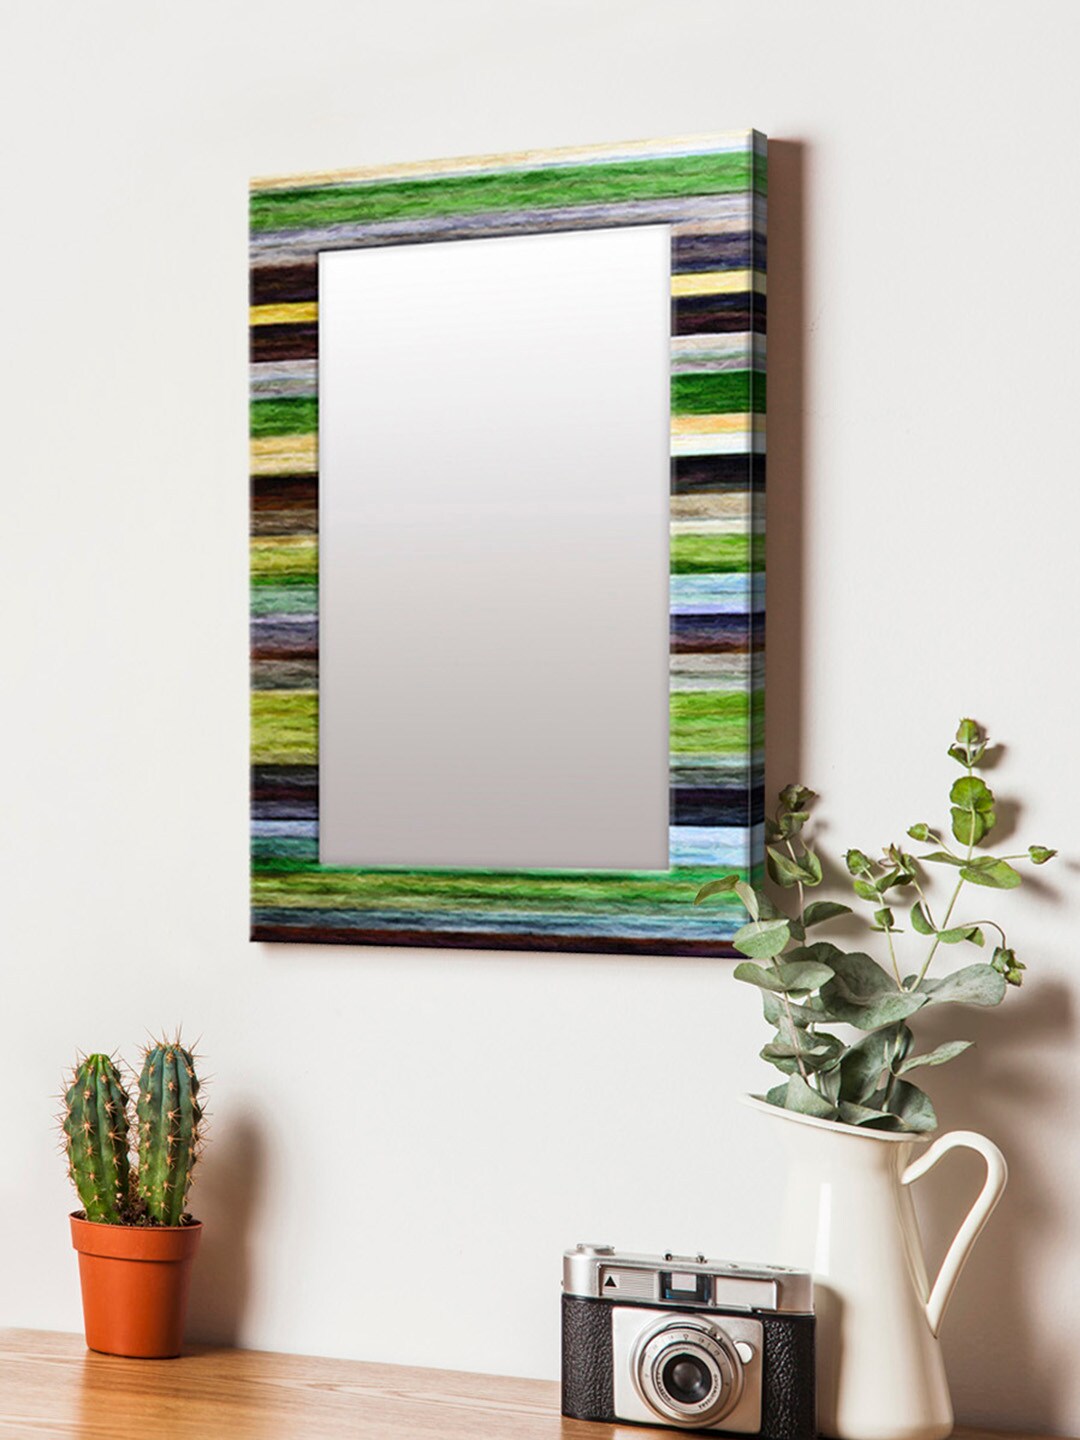 999Store Multicoloured Printed MDF Wall Mirror Price in India